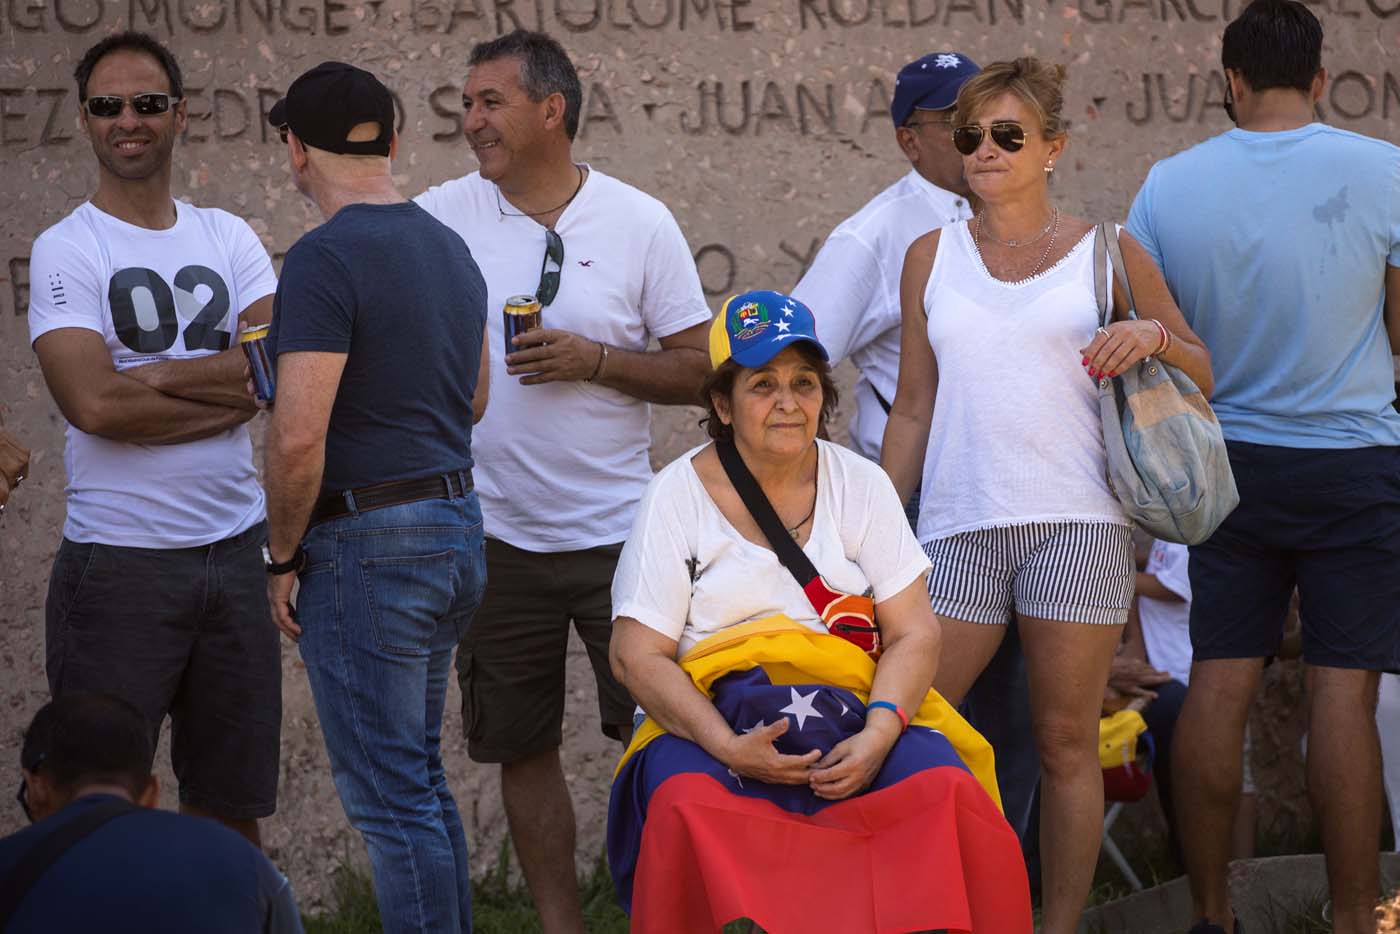 People wait to vote during an unofficial plebiscite against Venezuela's President Nicolas Maduro's government, in Madrid, Spain, July 16, 2017. REUTERS/Juan Medina